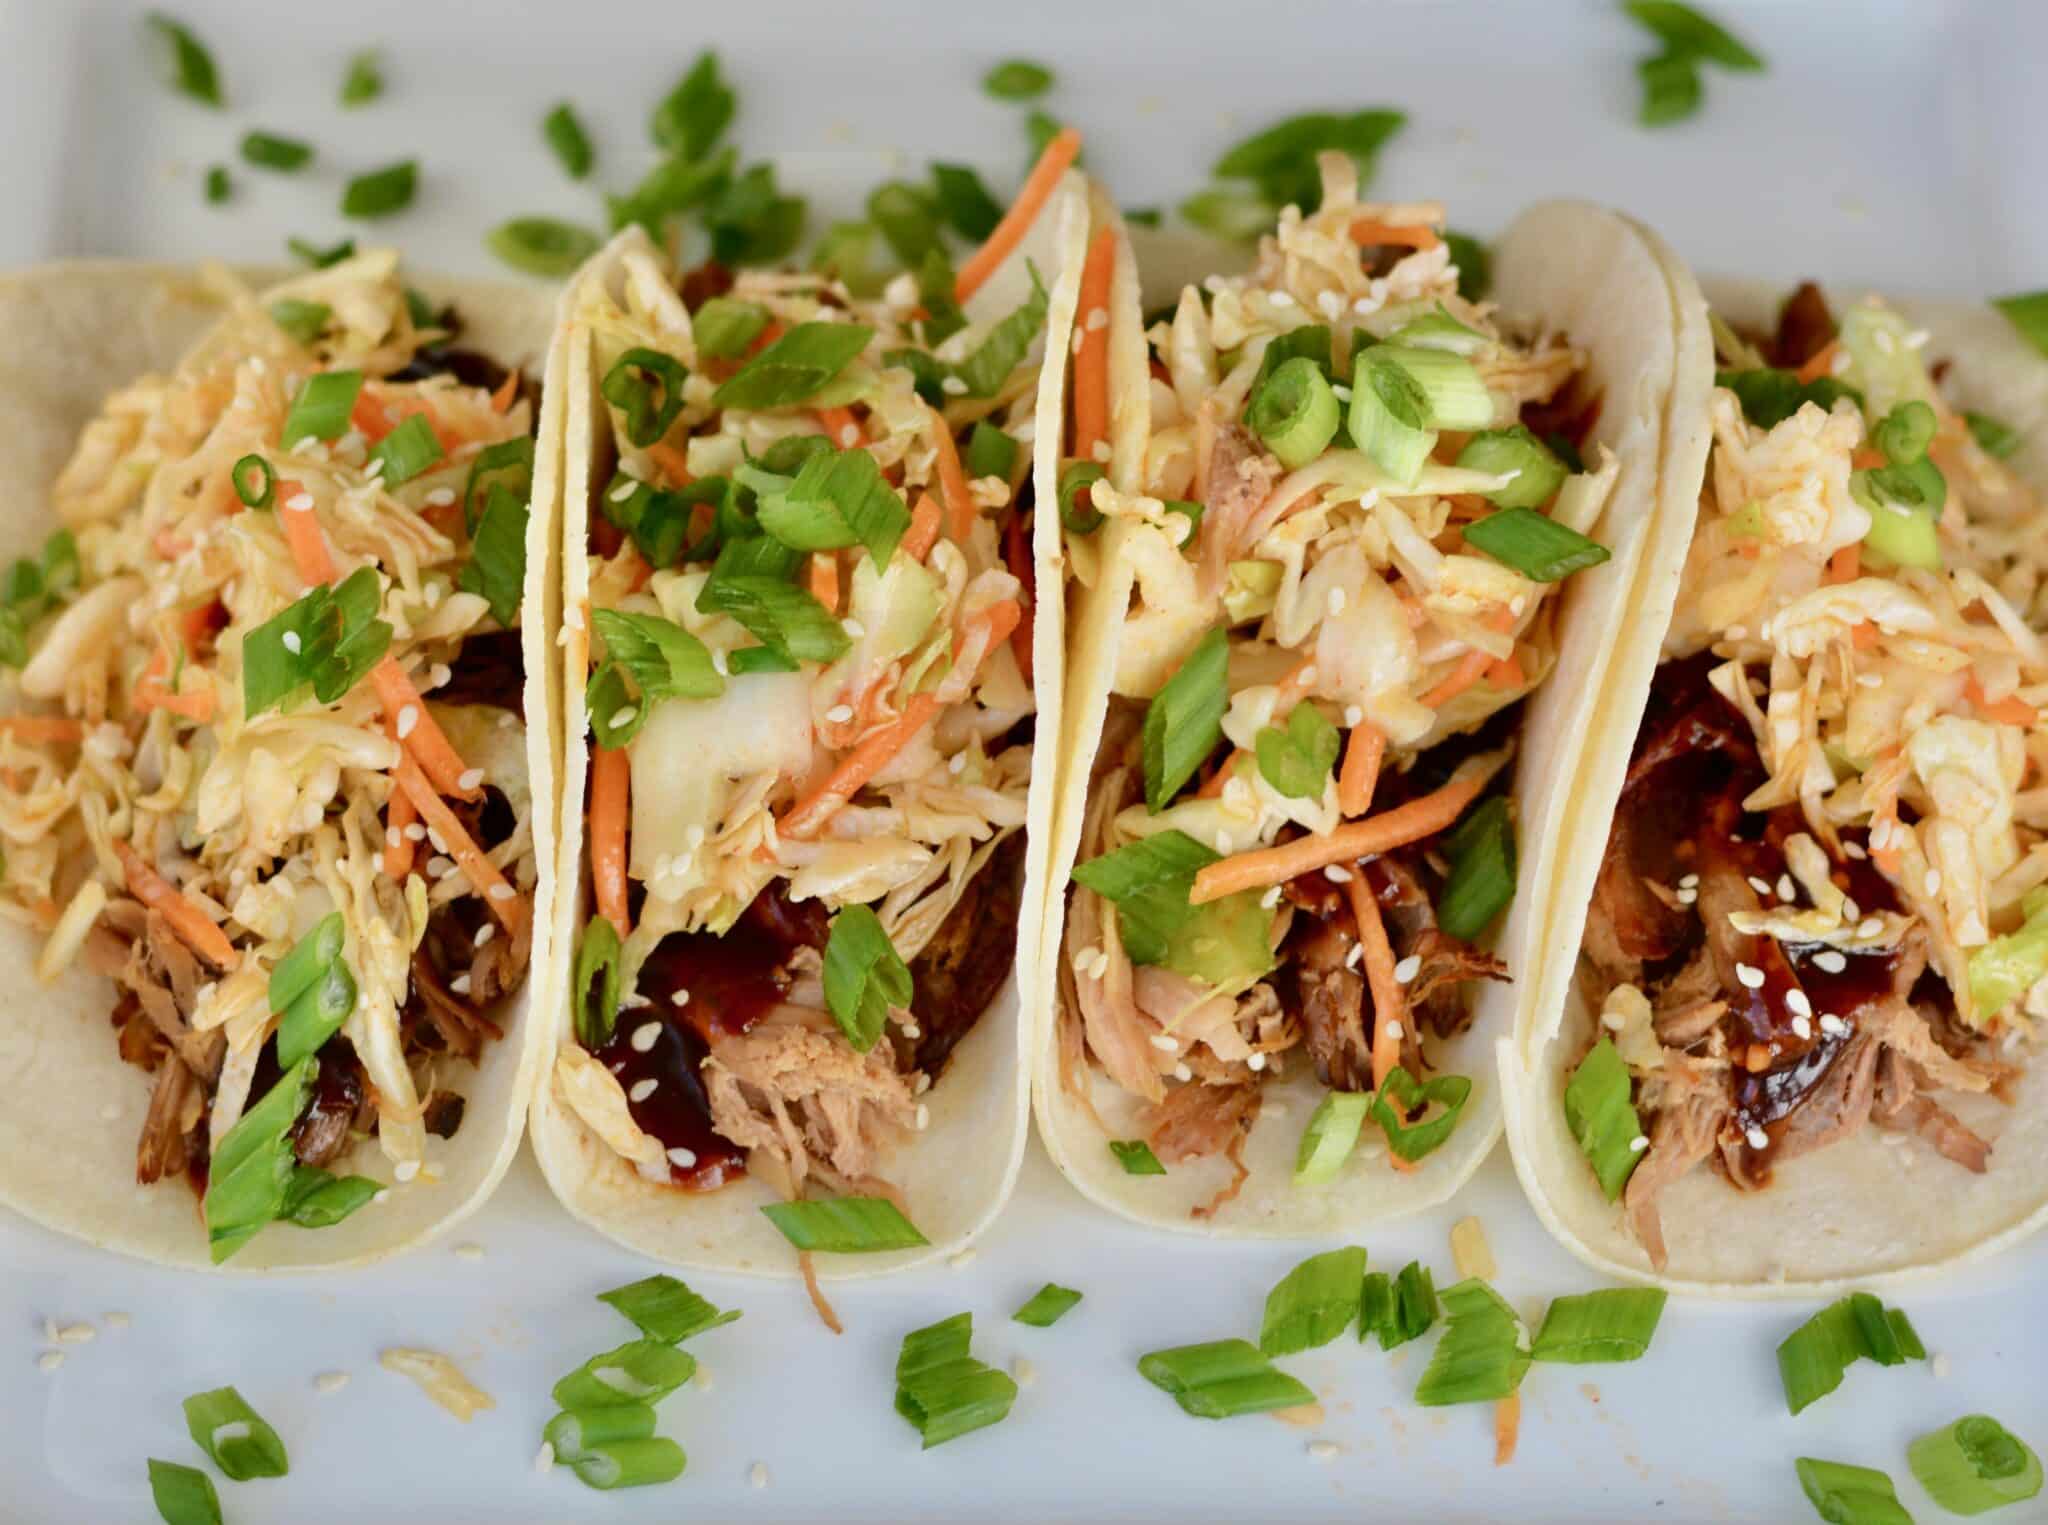 Korean BBQ Tacos with Quick Kimchi and Pulled Pork. Make Ahead Friendly